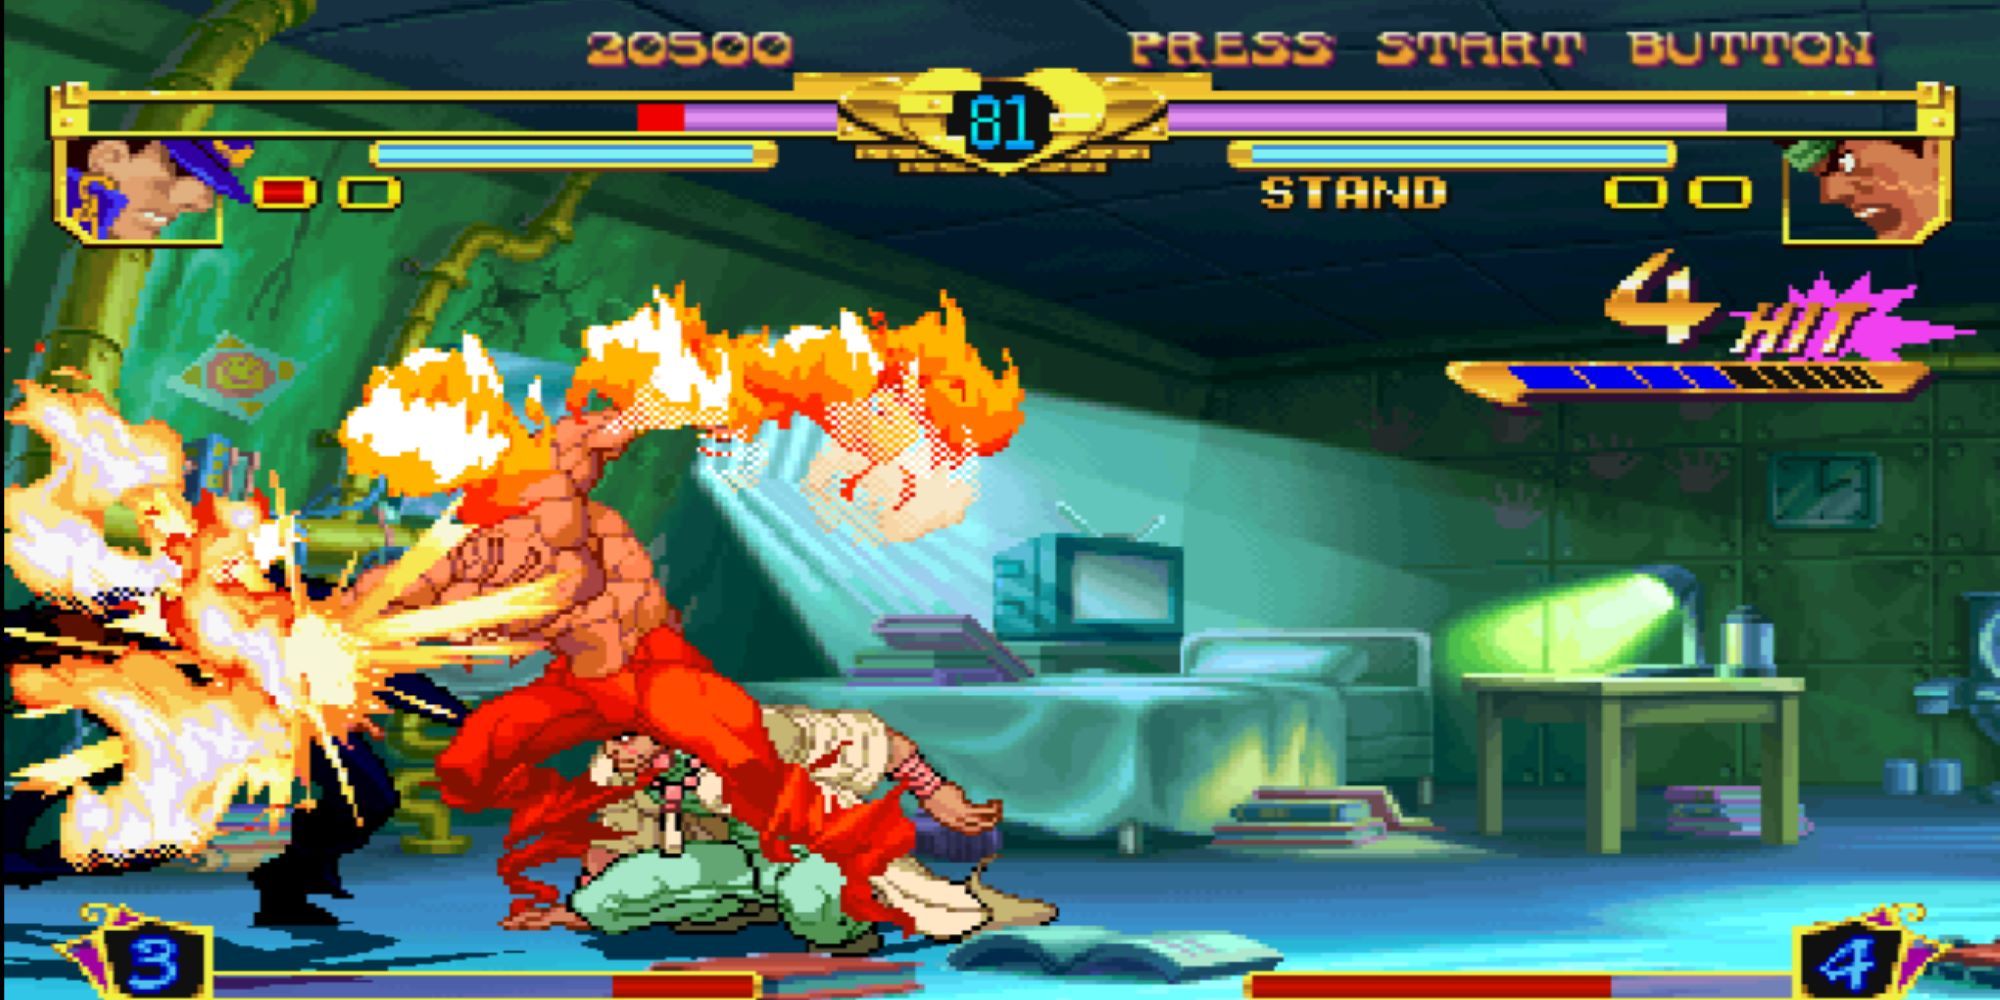 Avdol's stand, Magician's Red, burns Jotaro Kujo during an intense match inside a jail cell in Jojo's Bizarre Adventure: Heritage For The Future.